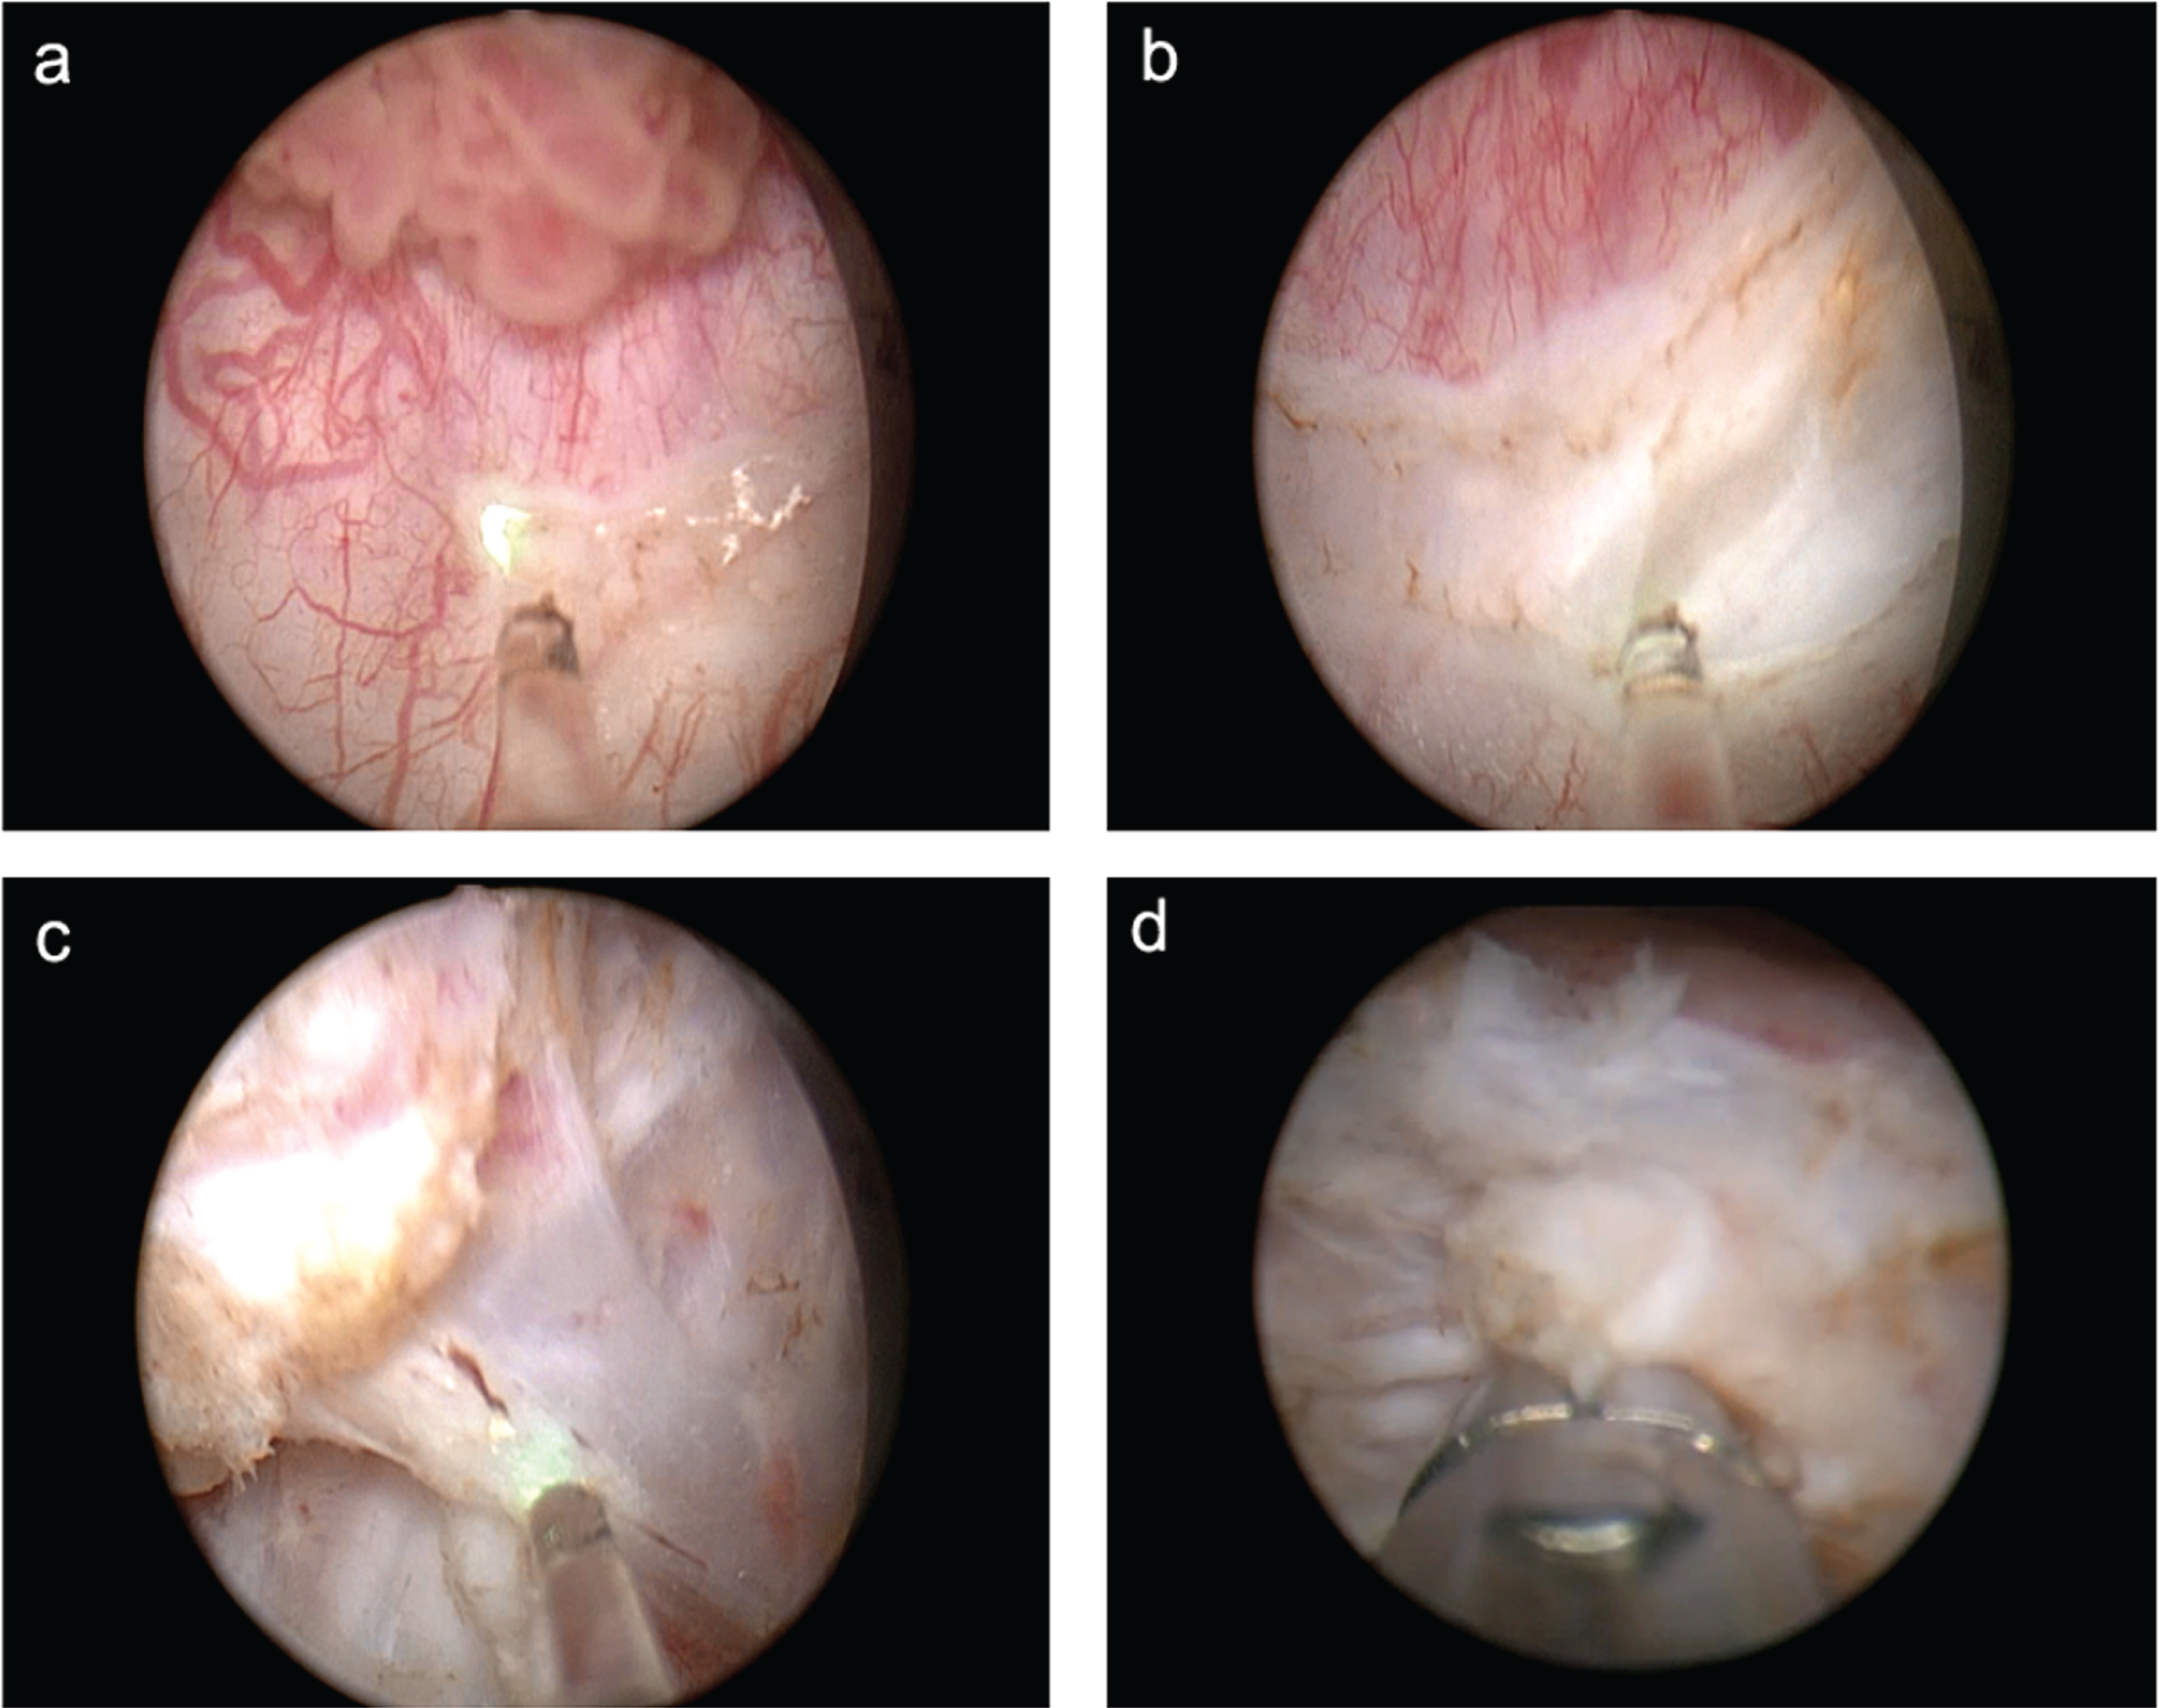 Stages of en bloc resection: incision in the mucosa (a), incision in the muscular layer (b), resection of the tumor base from the surgical site (c), random biopsy from the surgical site (d).